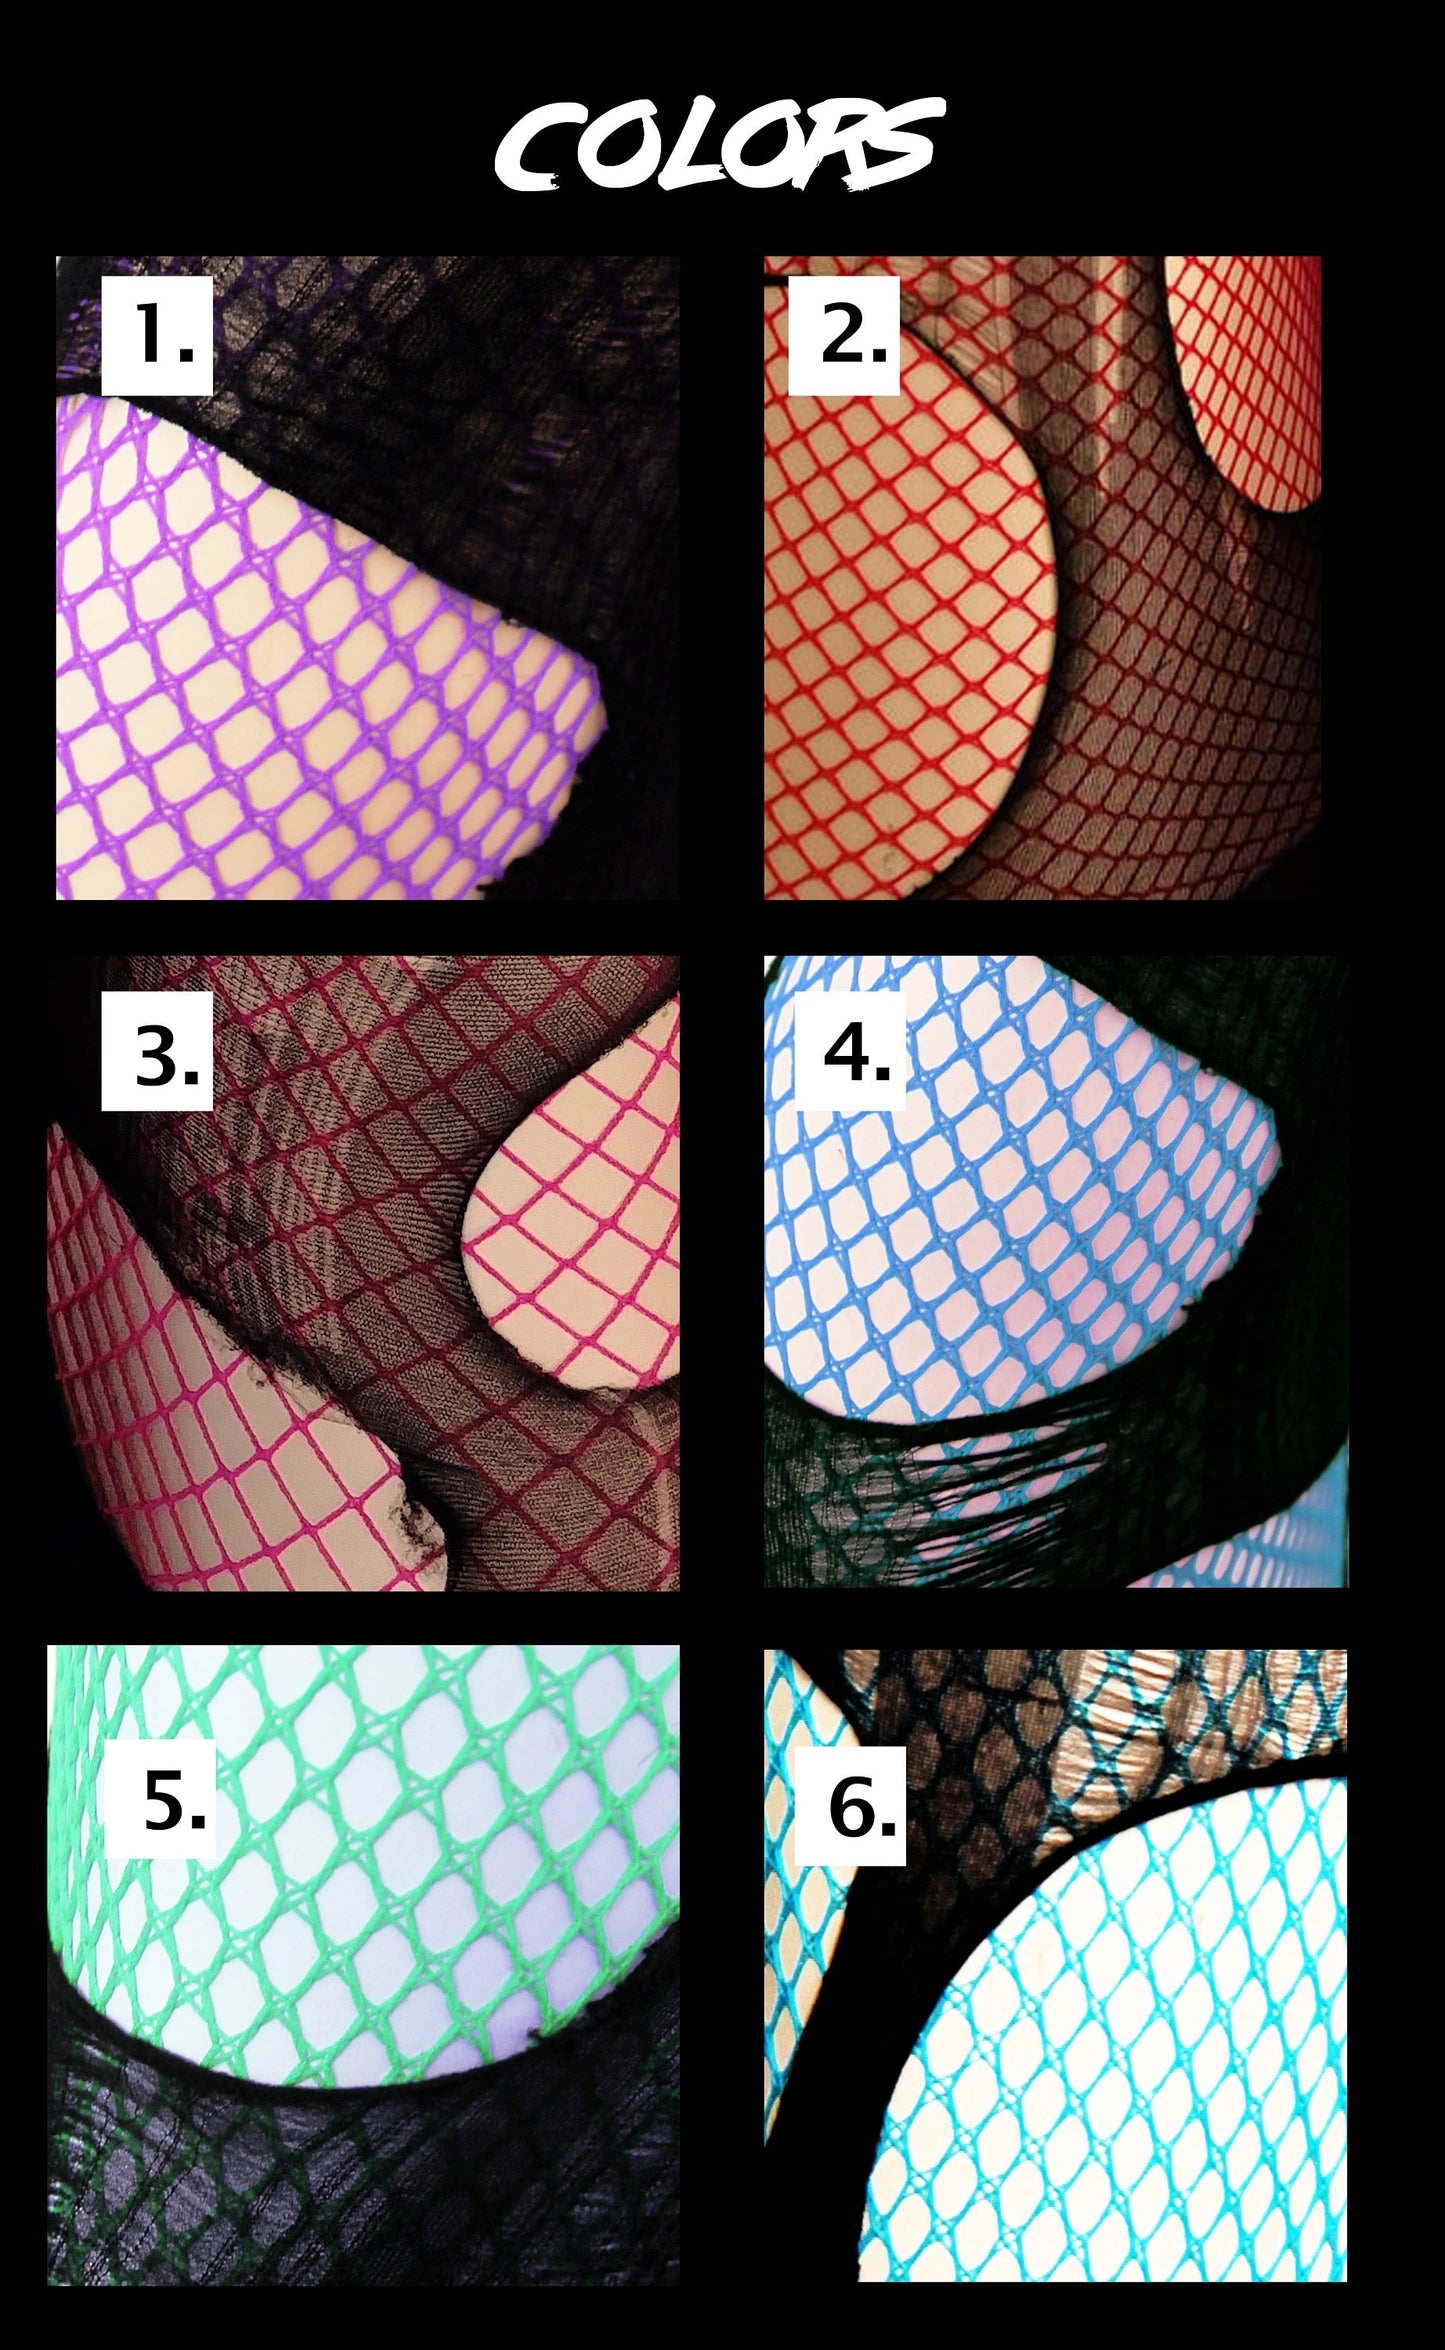 double layered torn fishnet stockings in baby blue and black